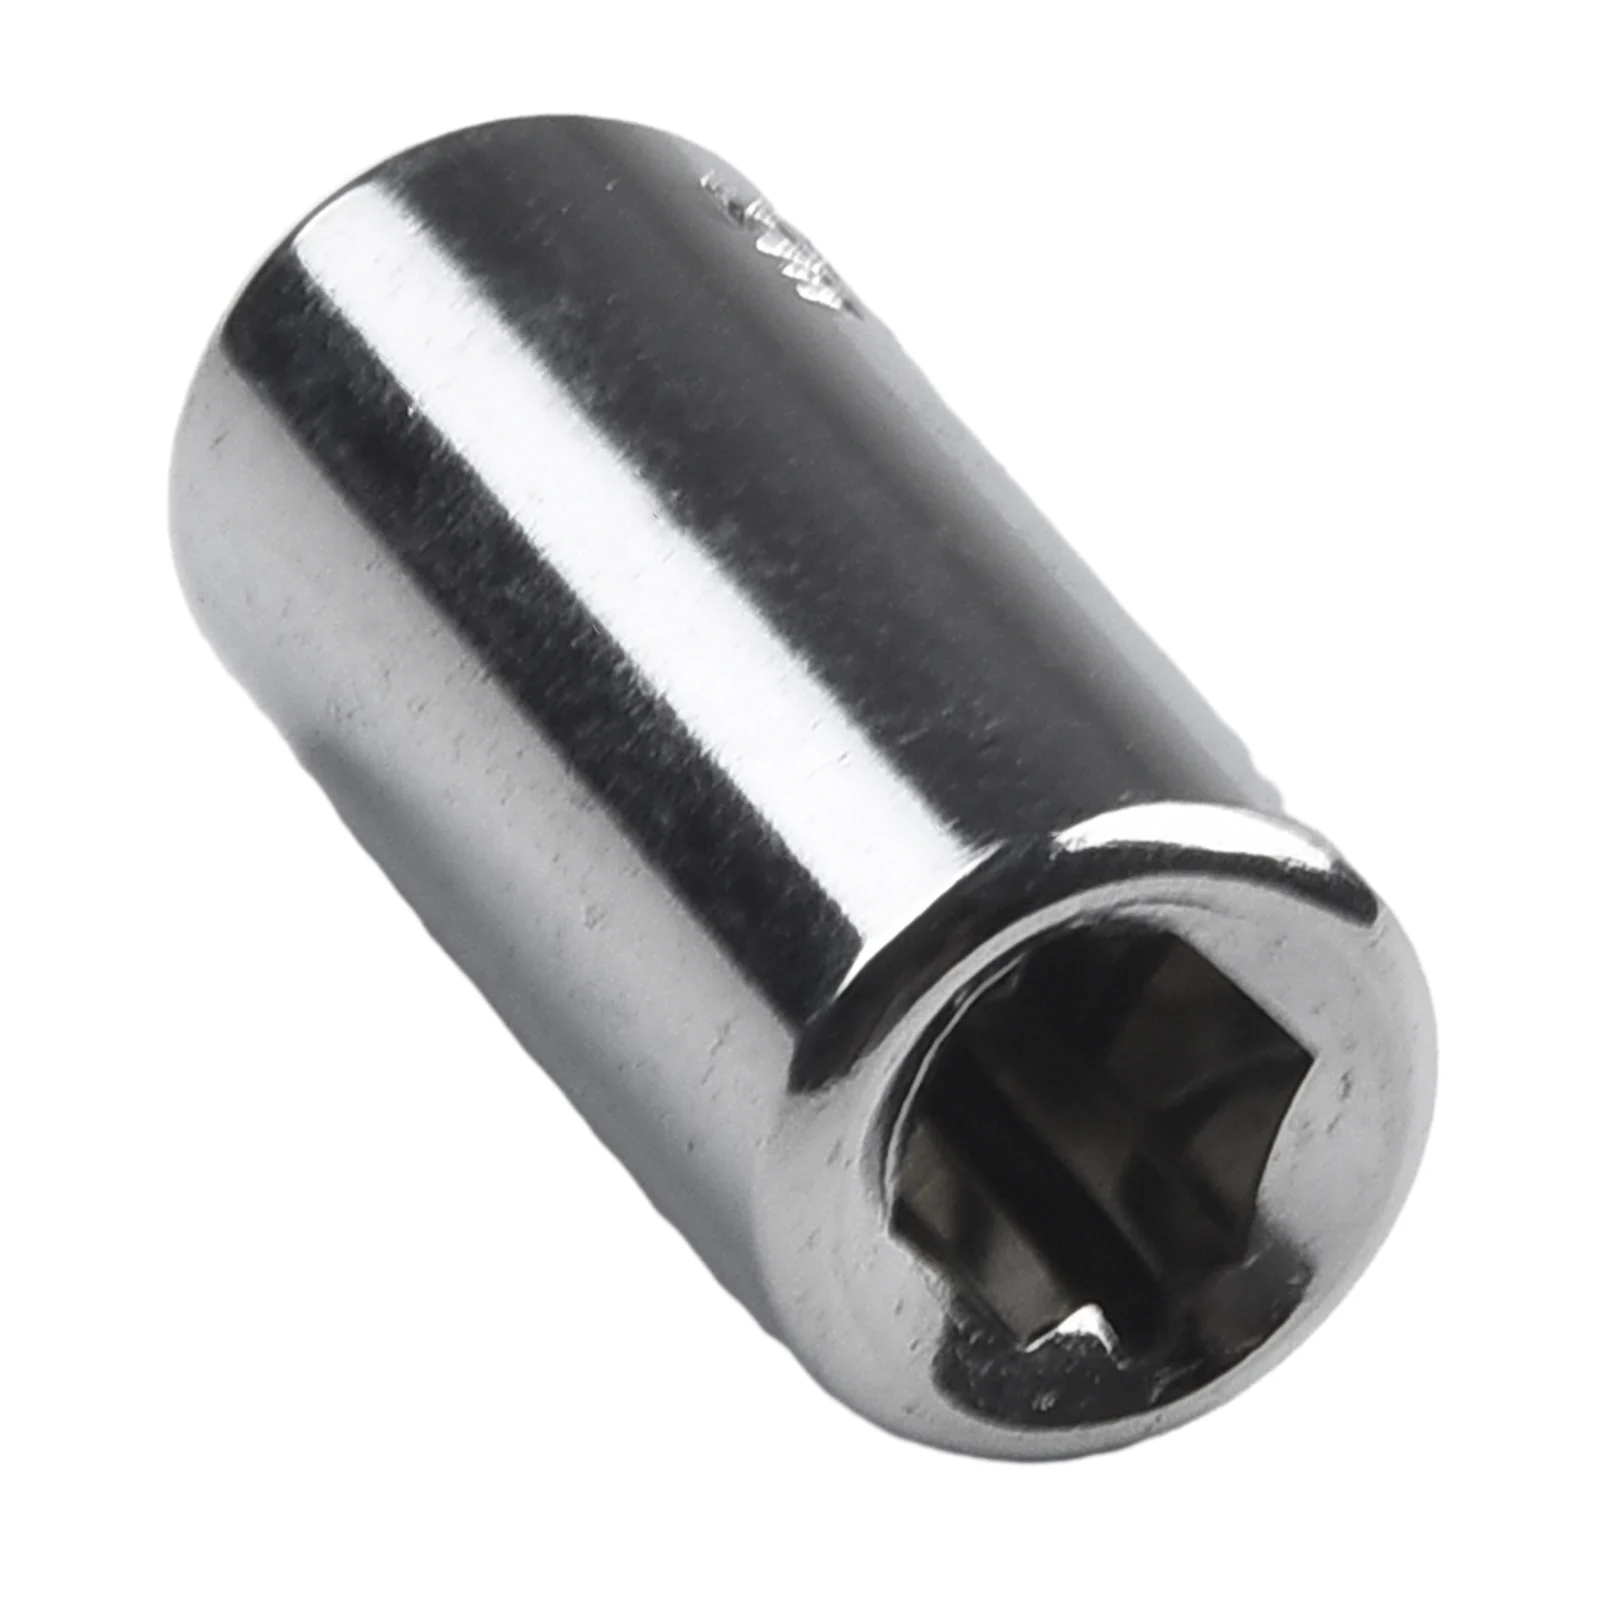 2222   Impact Socket Adapter 1/2 To 1/4 1/4 3/8 Square Nut Quick Wrench Ratchet Adapter Converter Chuck Adapter Hand Tools